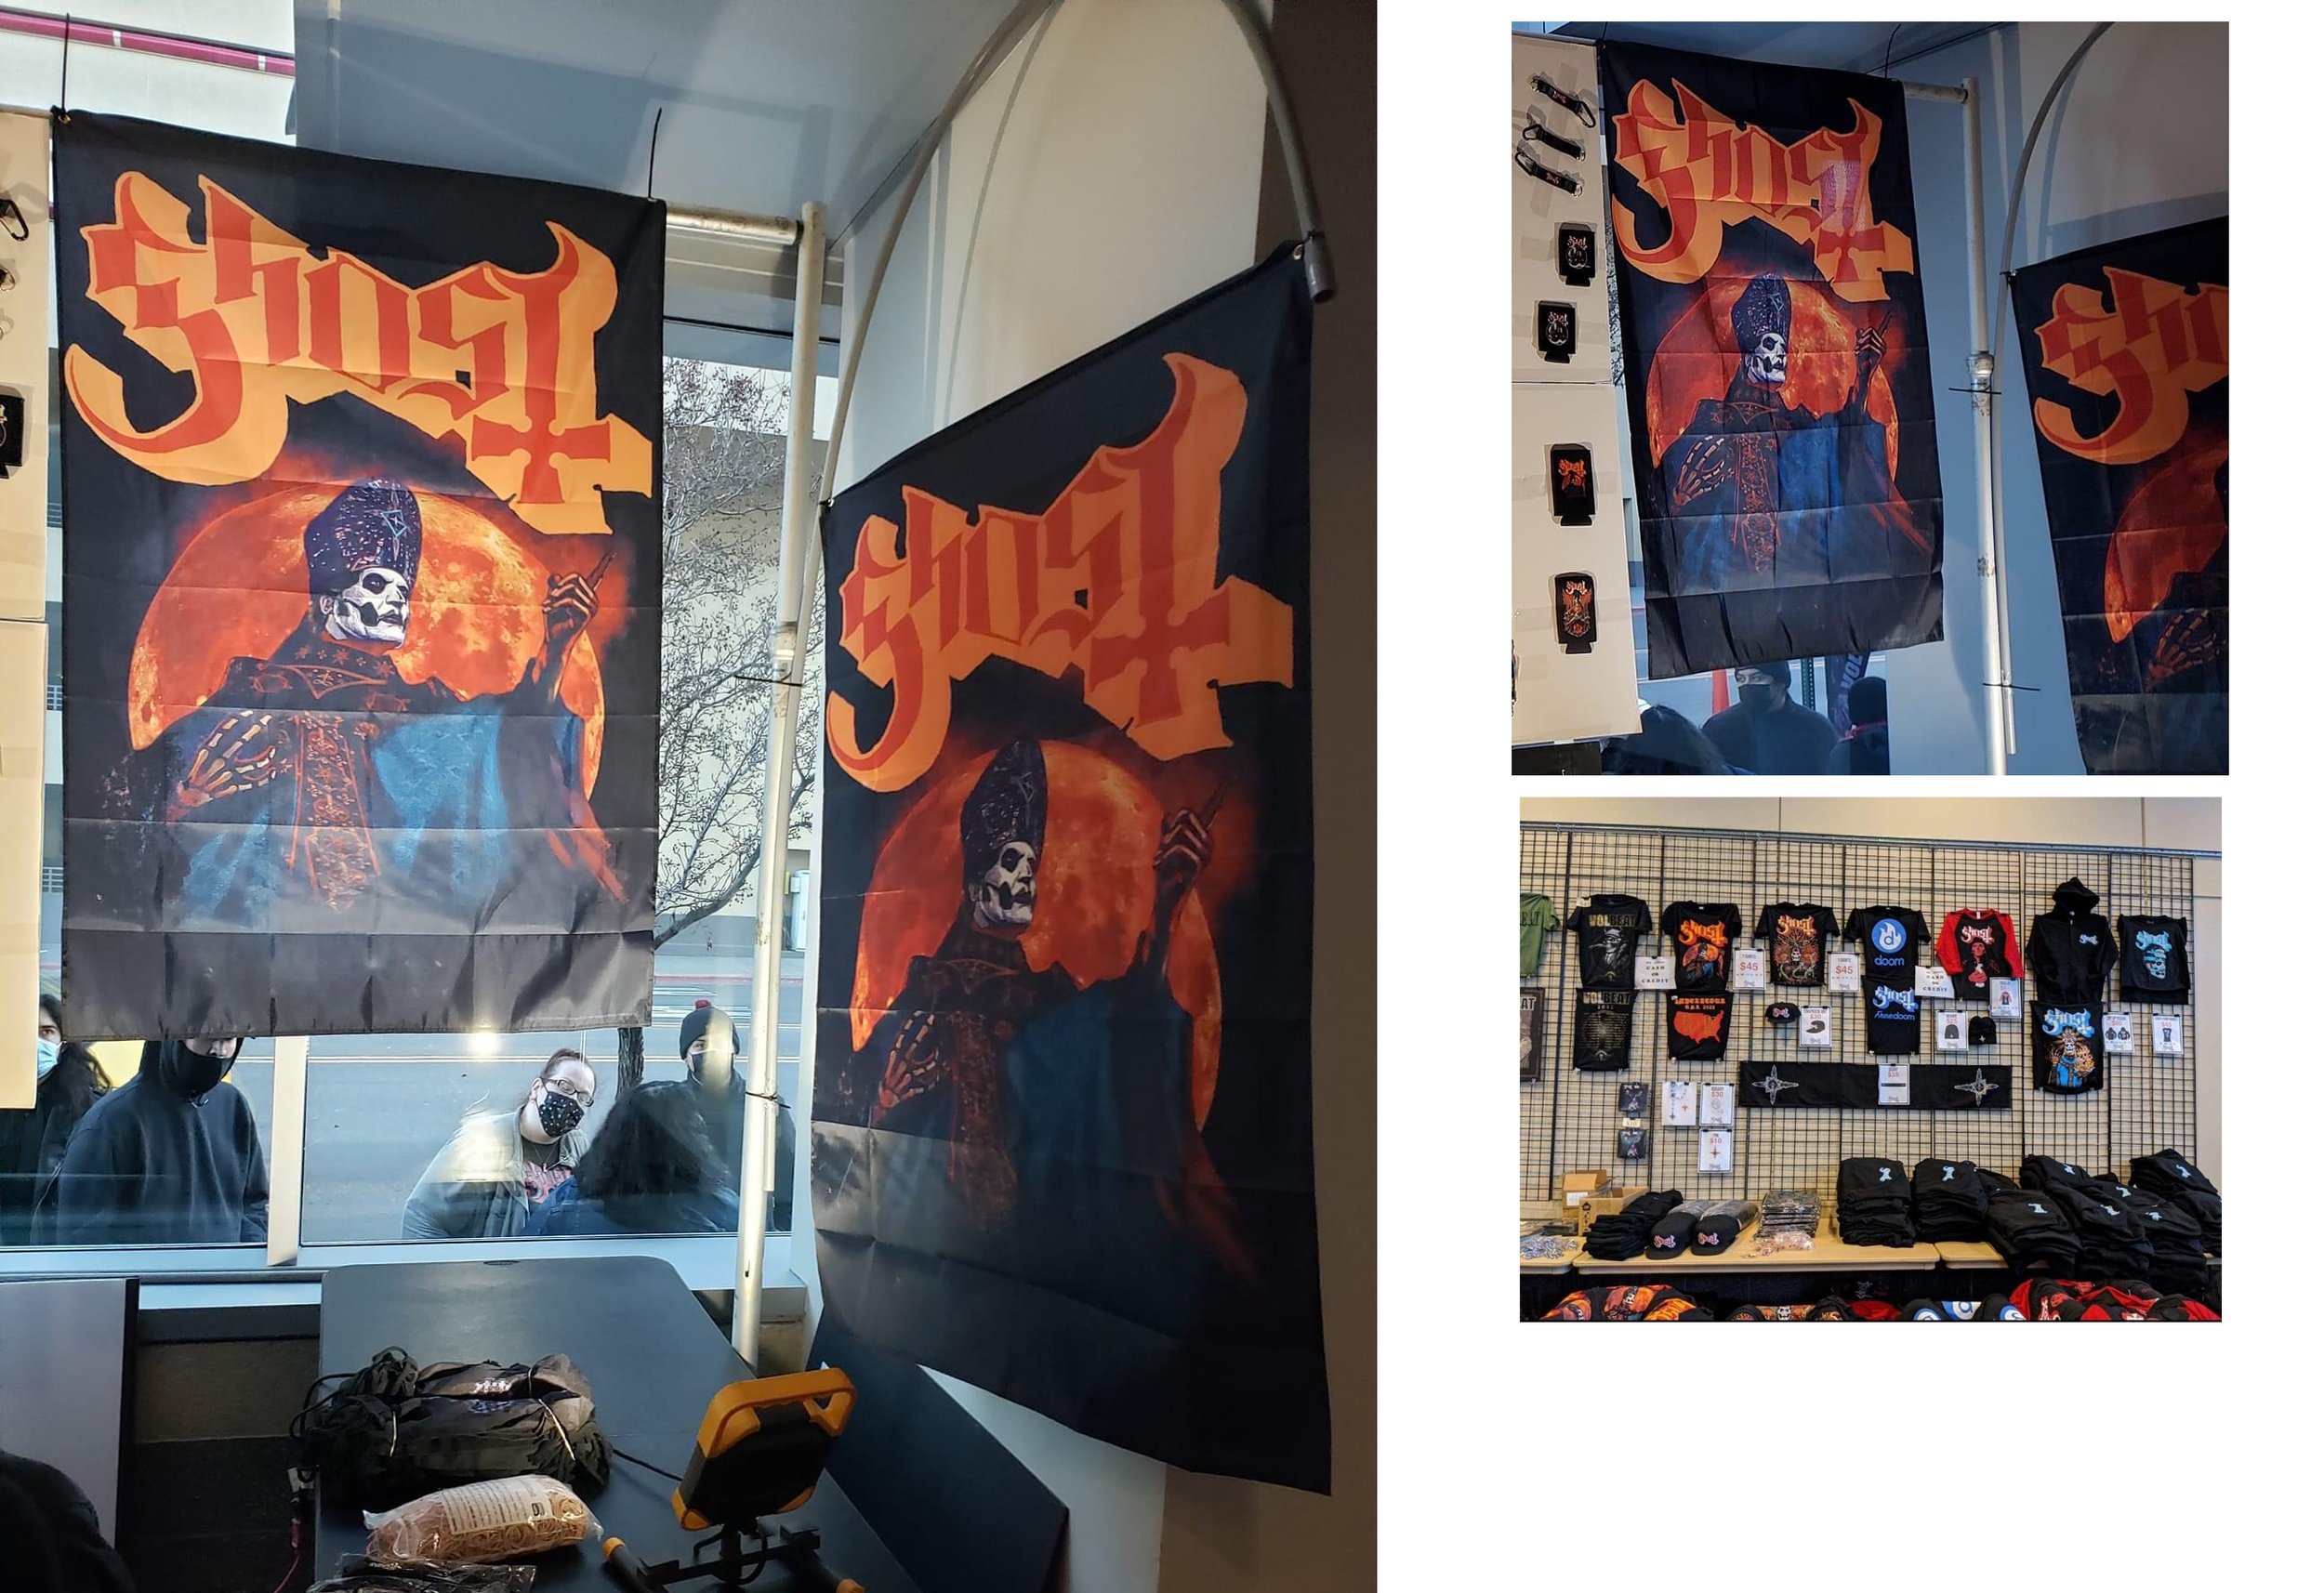   GHOST | PRE_IMPERA Tour Shirt and Flag      